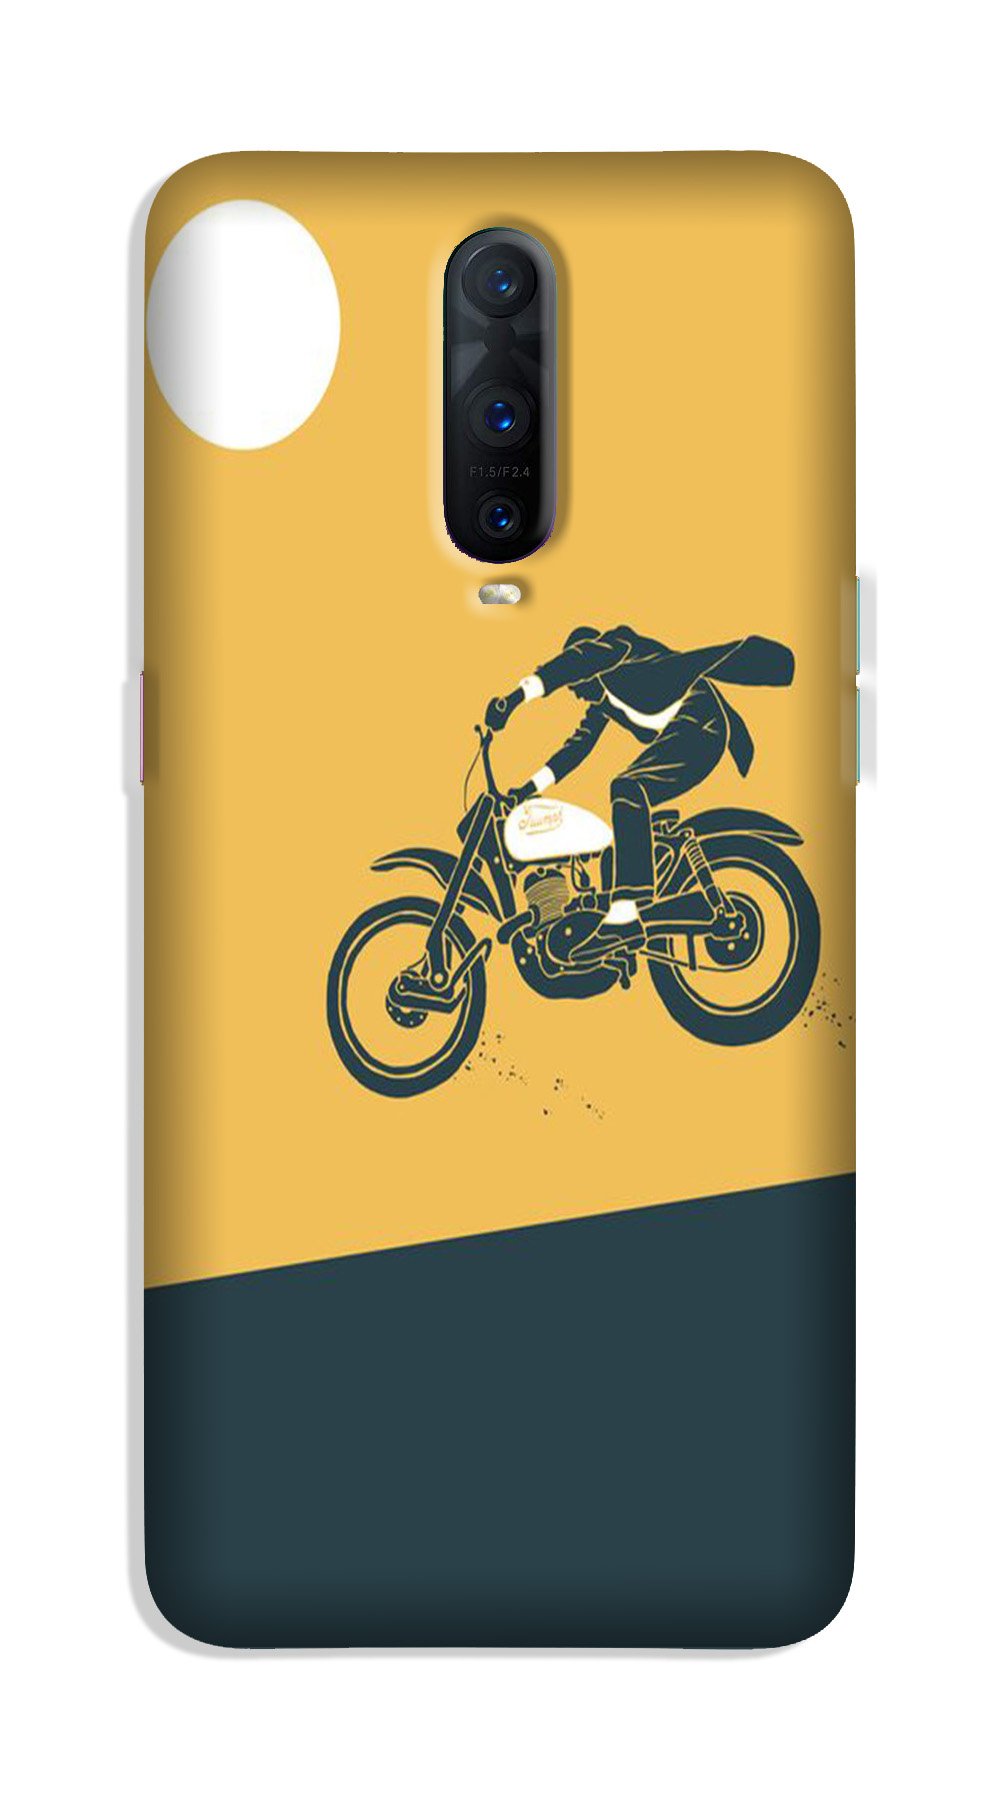 Bike Lovers Case for OnePlus 7 Pro (Design No. 256)